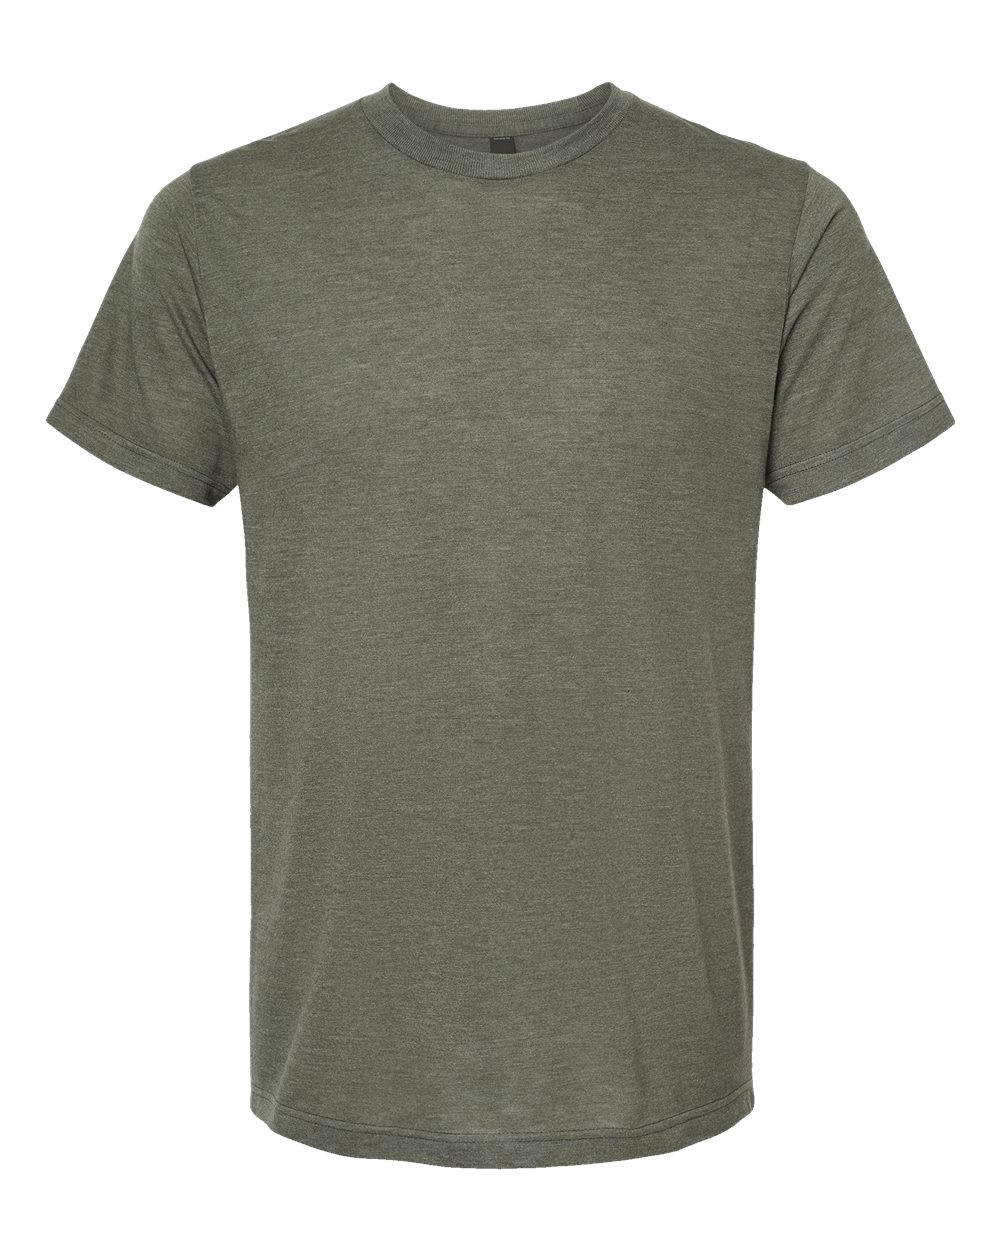 click to view Military Tri Blend